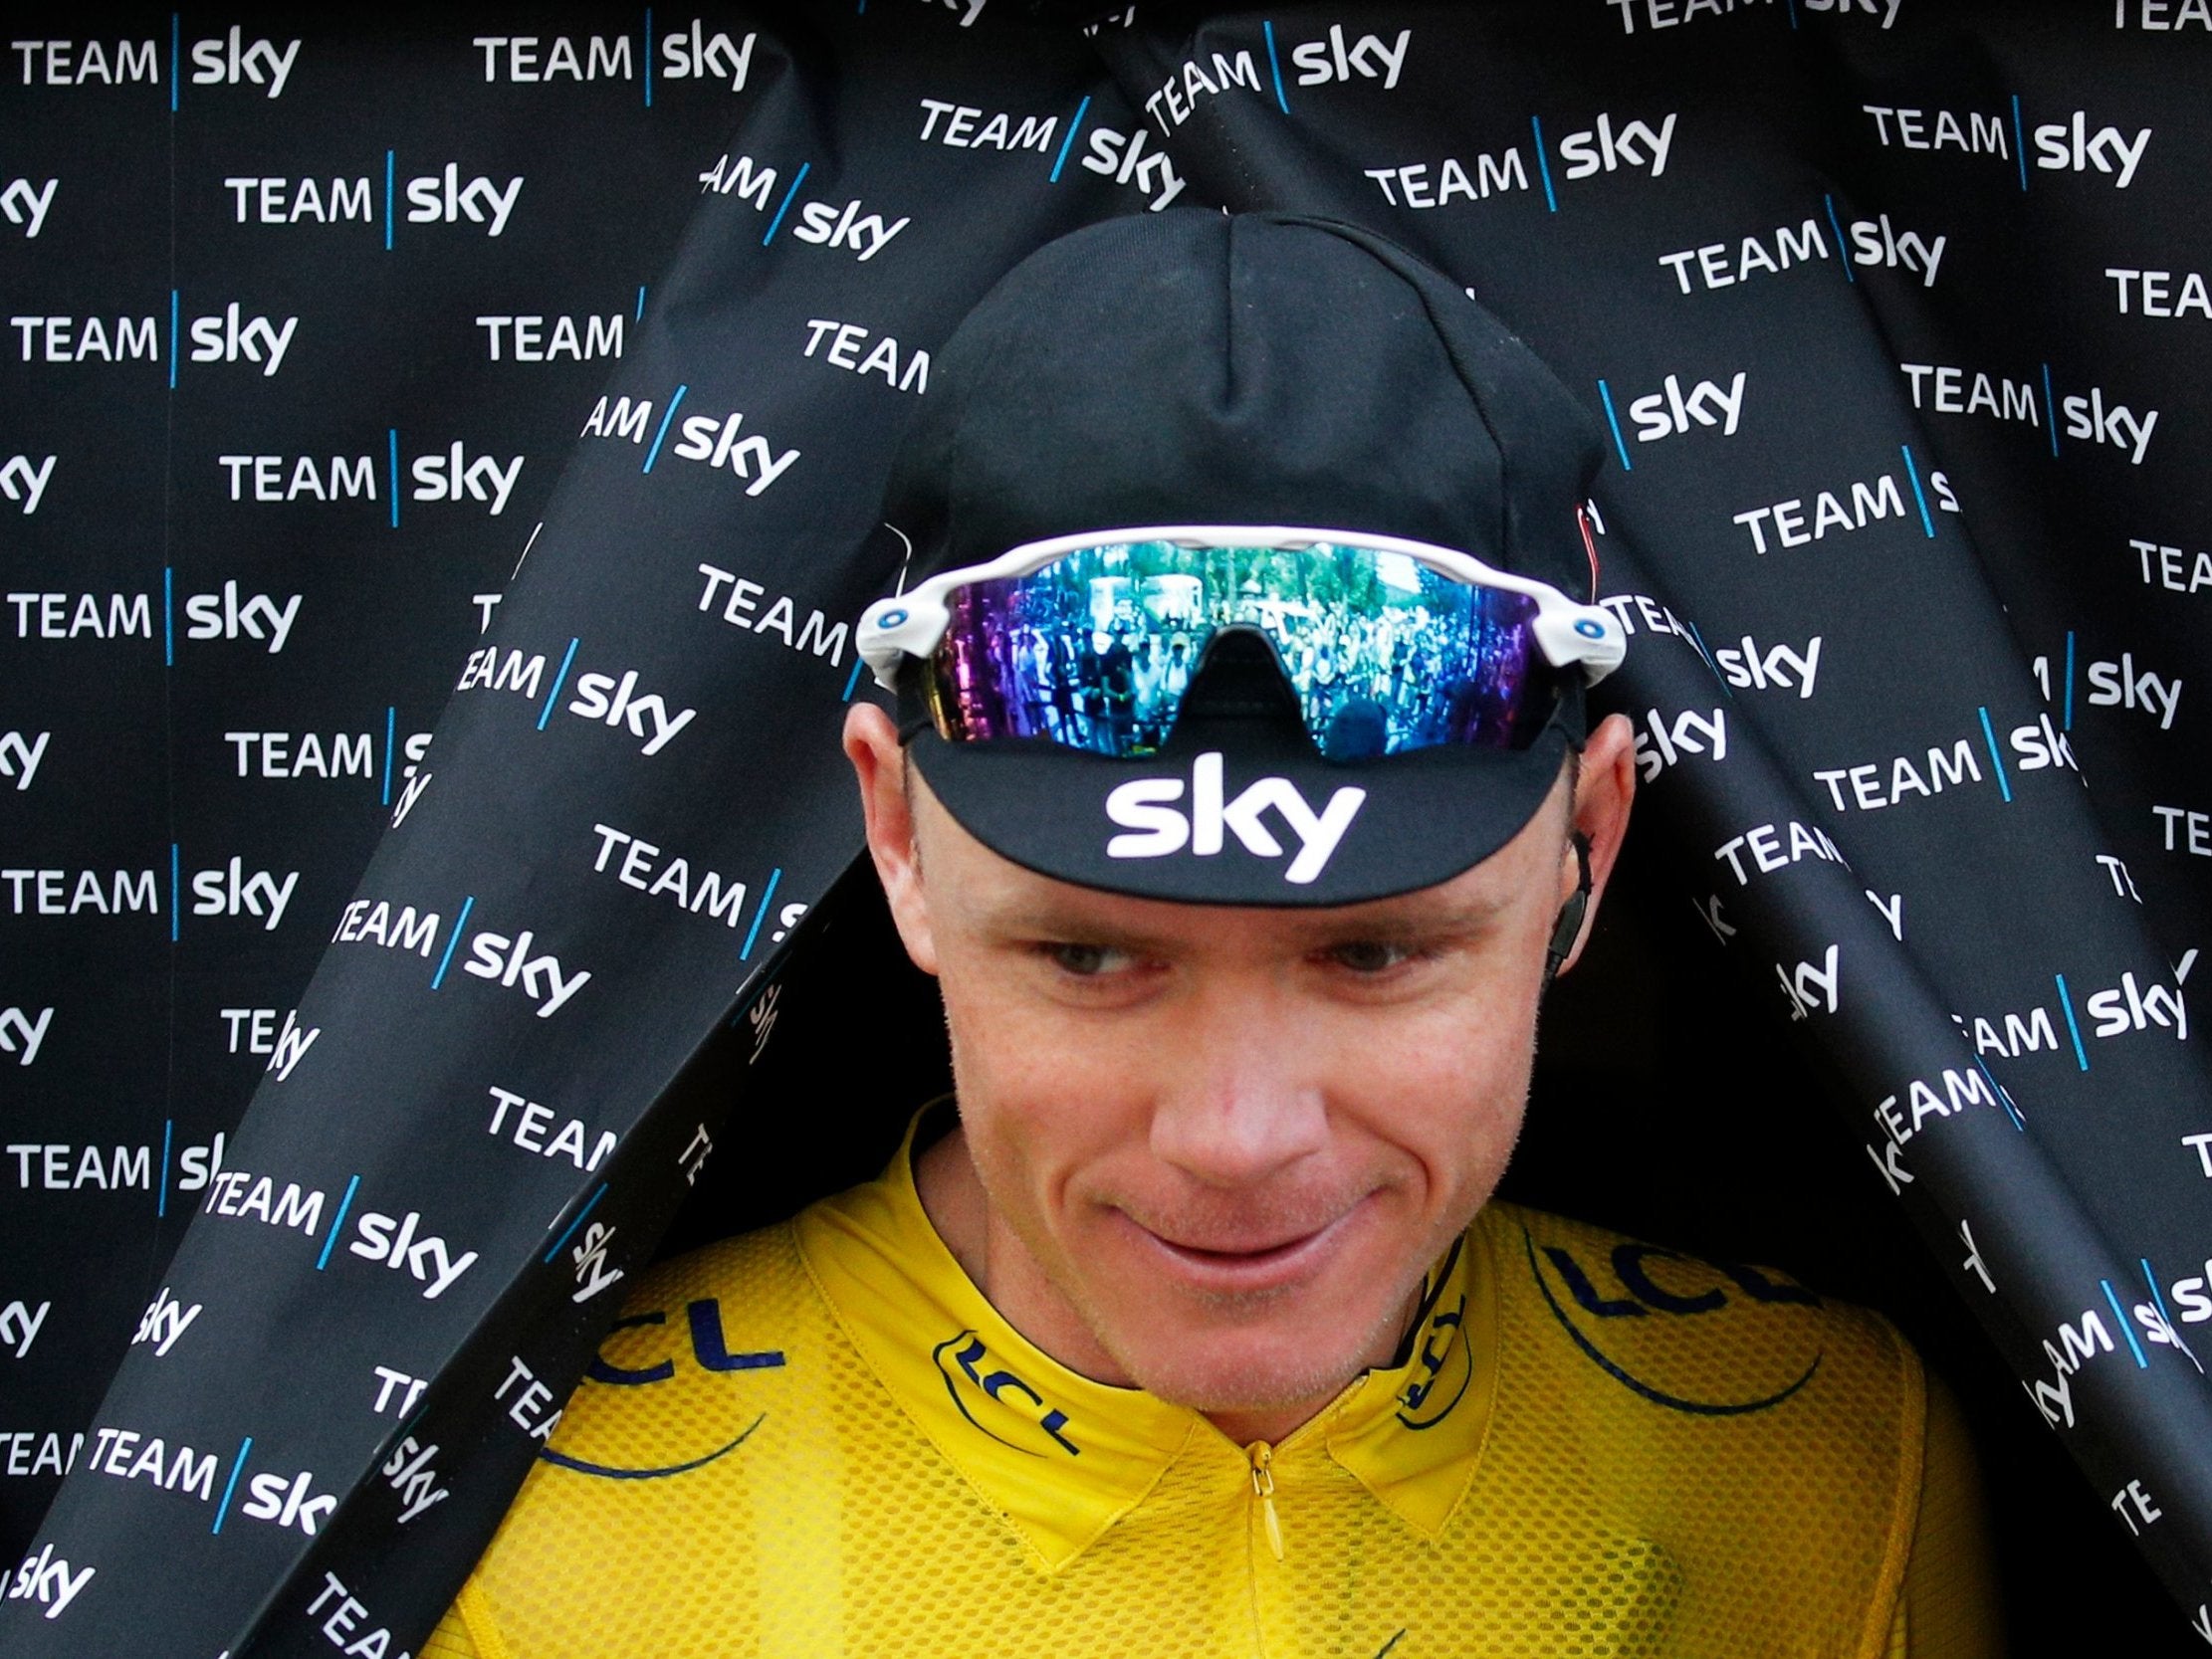 Chris Froome will be riding to win his fifth Tour de France